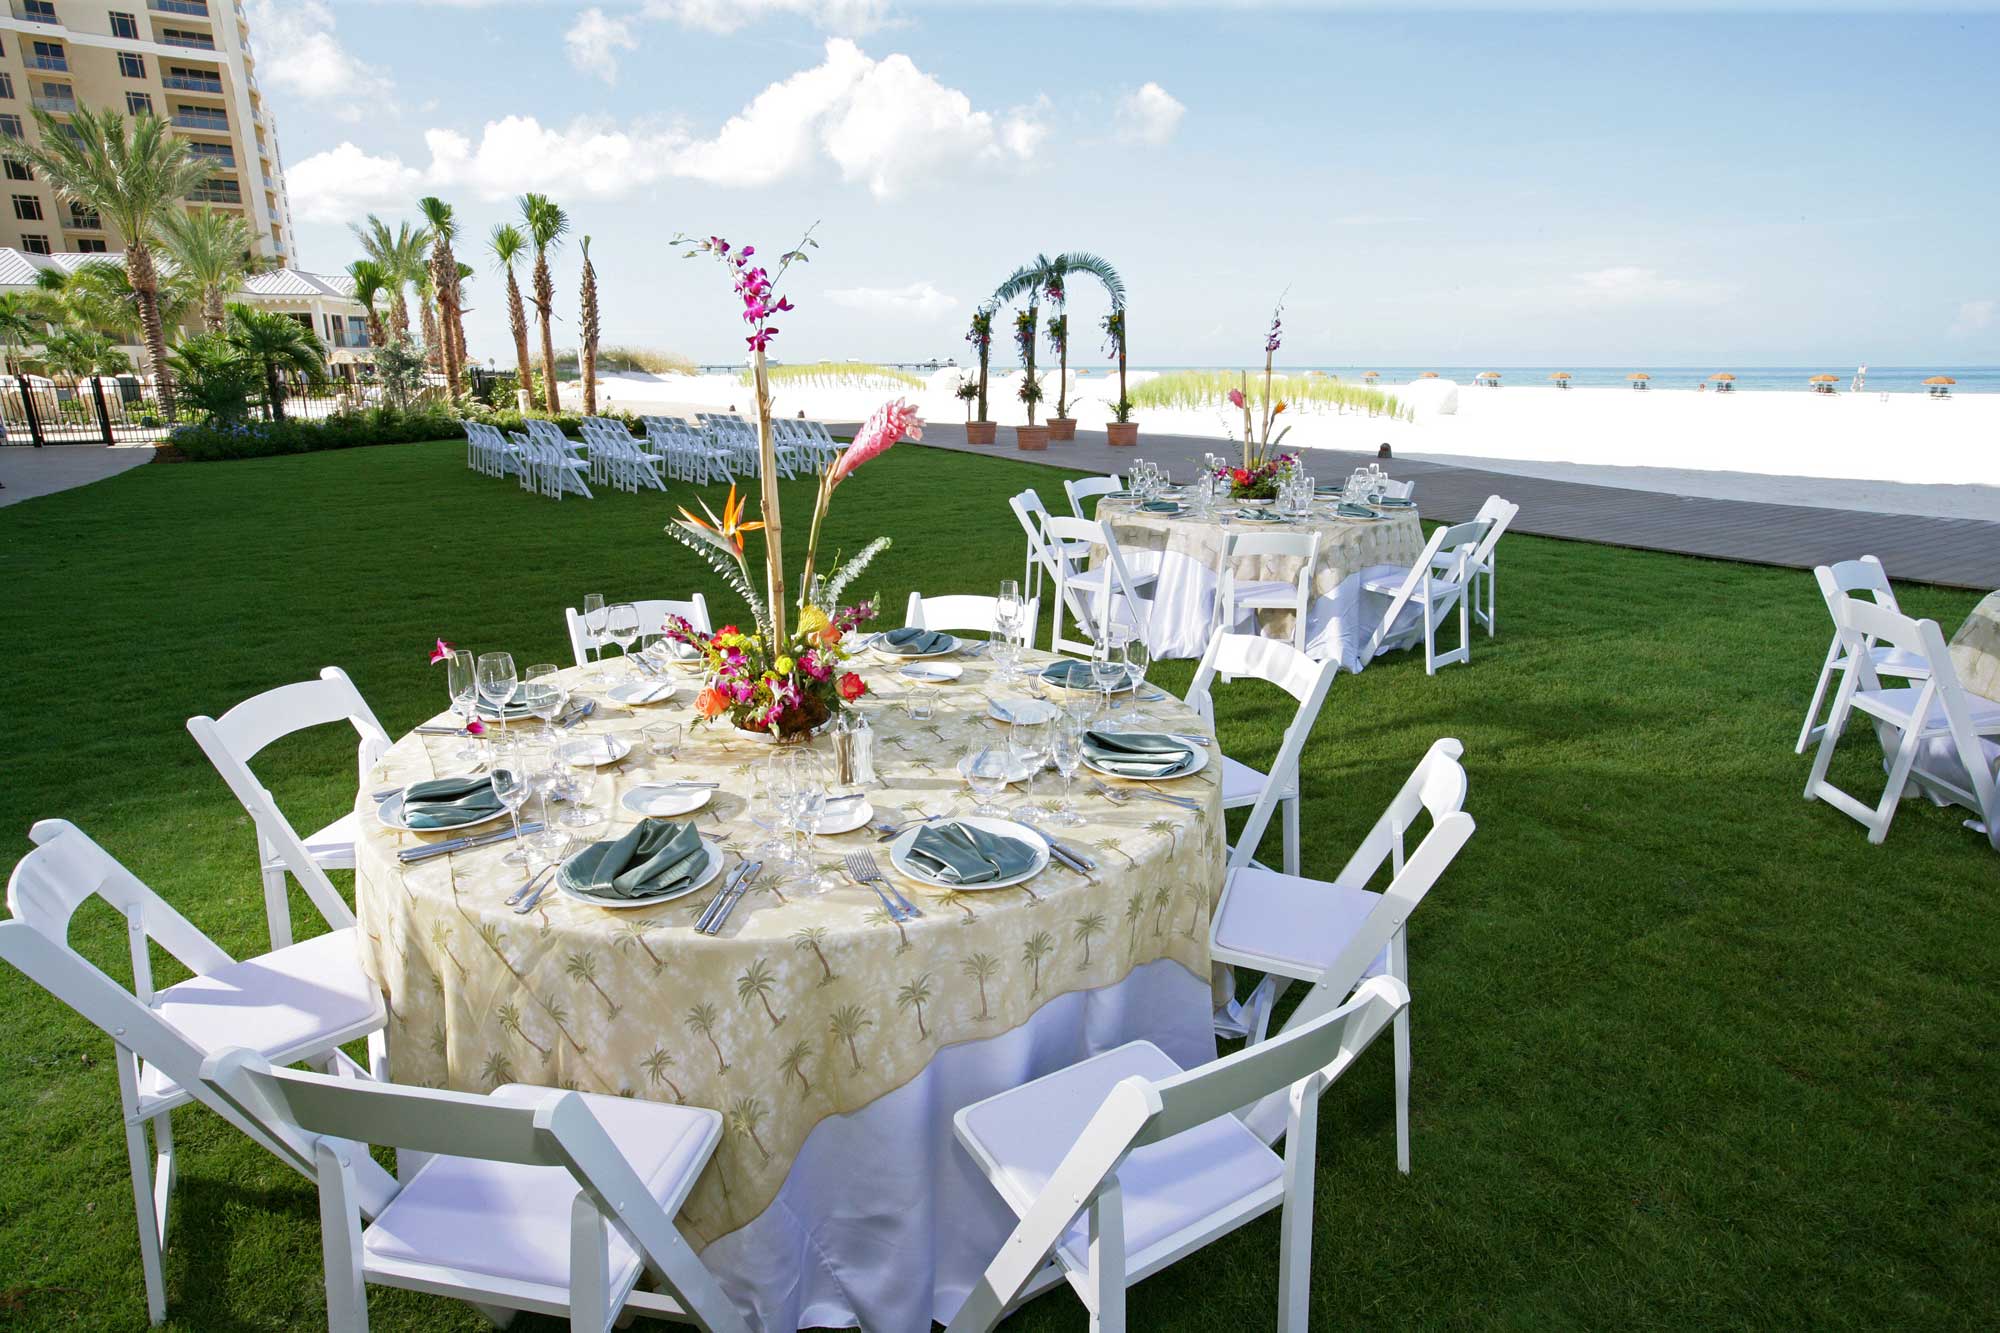 Top Florida Wedding Venues for Florida Destination Weddings | Best Places to Get Married in Florida | Sandpearl Resort